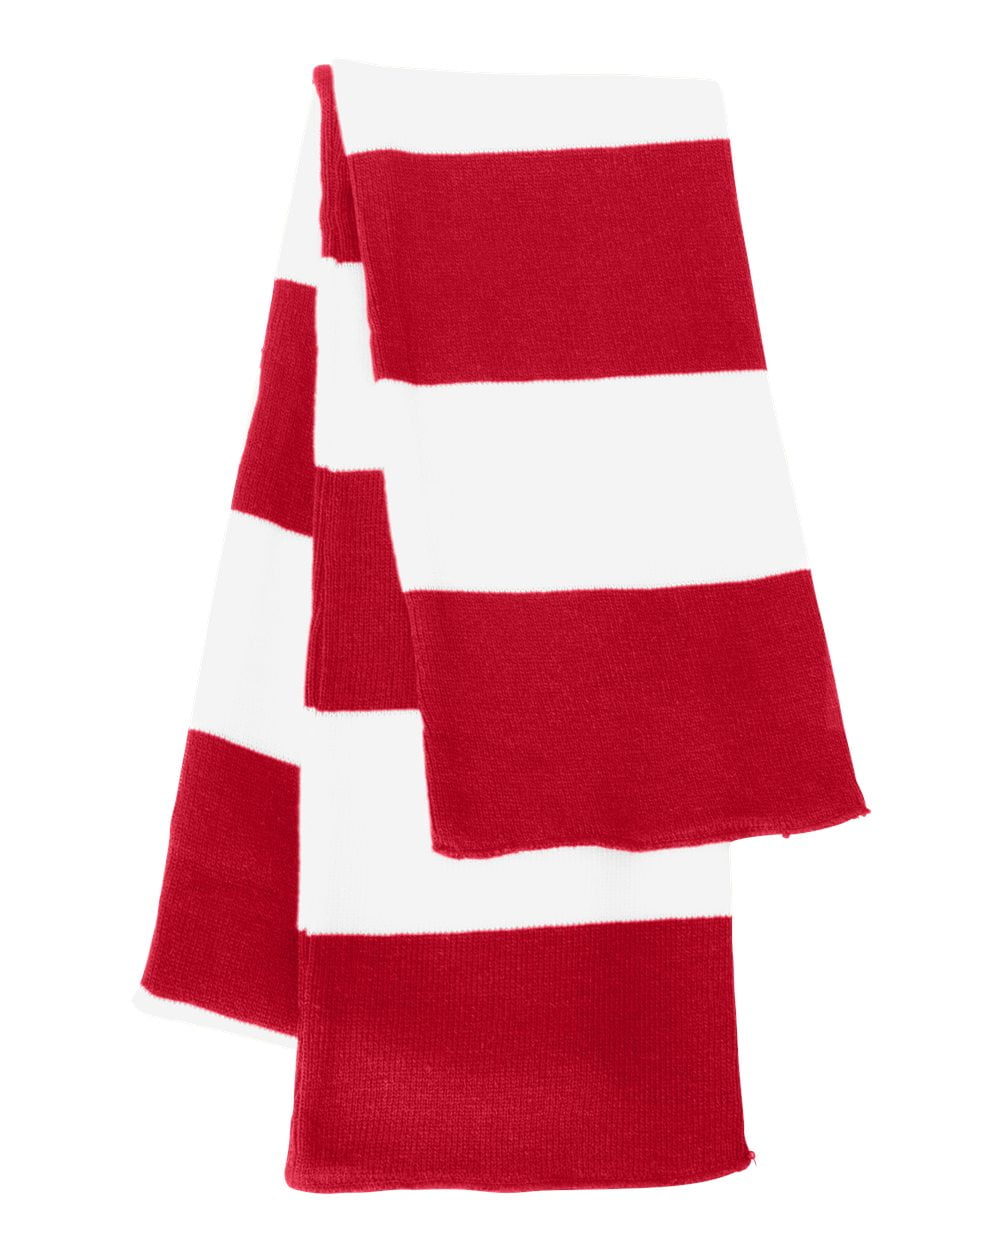 Knit Winter Rugby Striped Scarf Men & Women - Stay Warm & Stylish (Red/ White) -